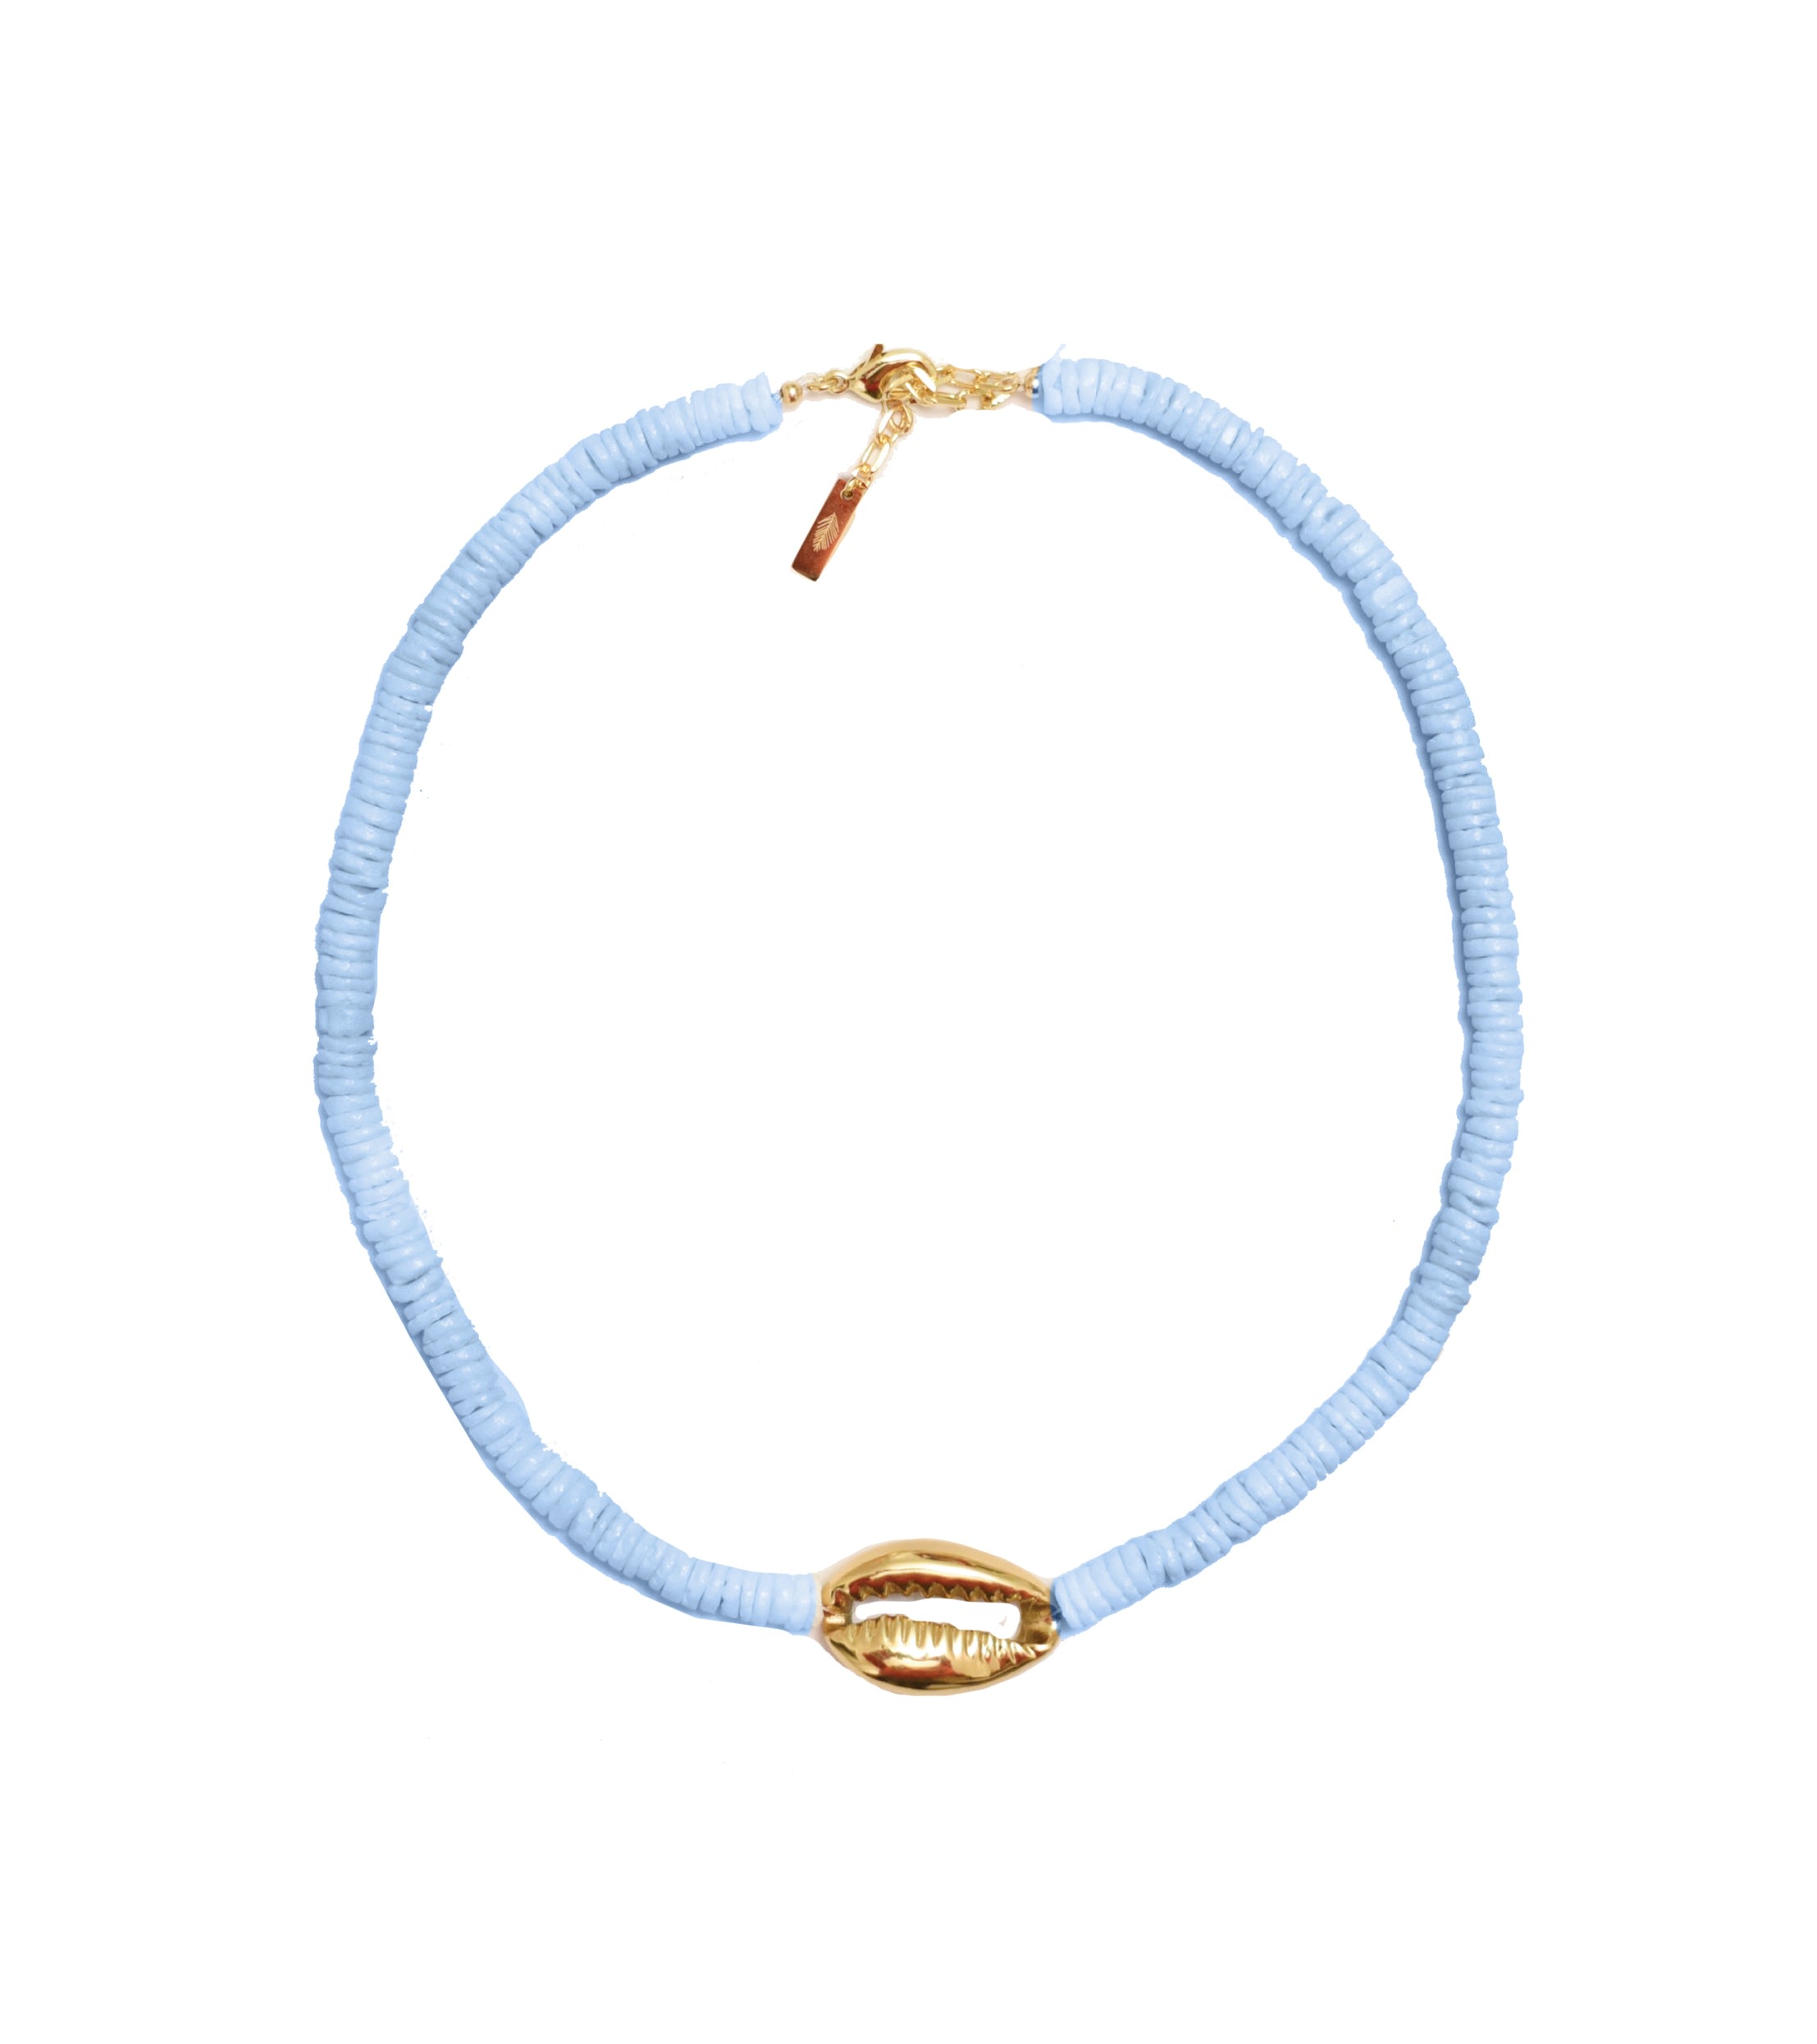 Women’s Heishi Gold Shell Necklace - Blue Adriana Pappas Designs